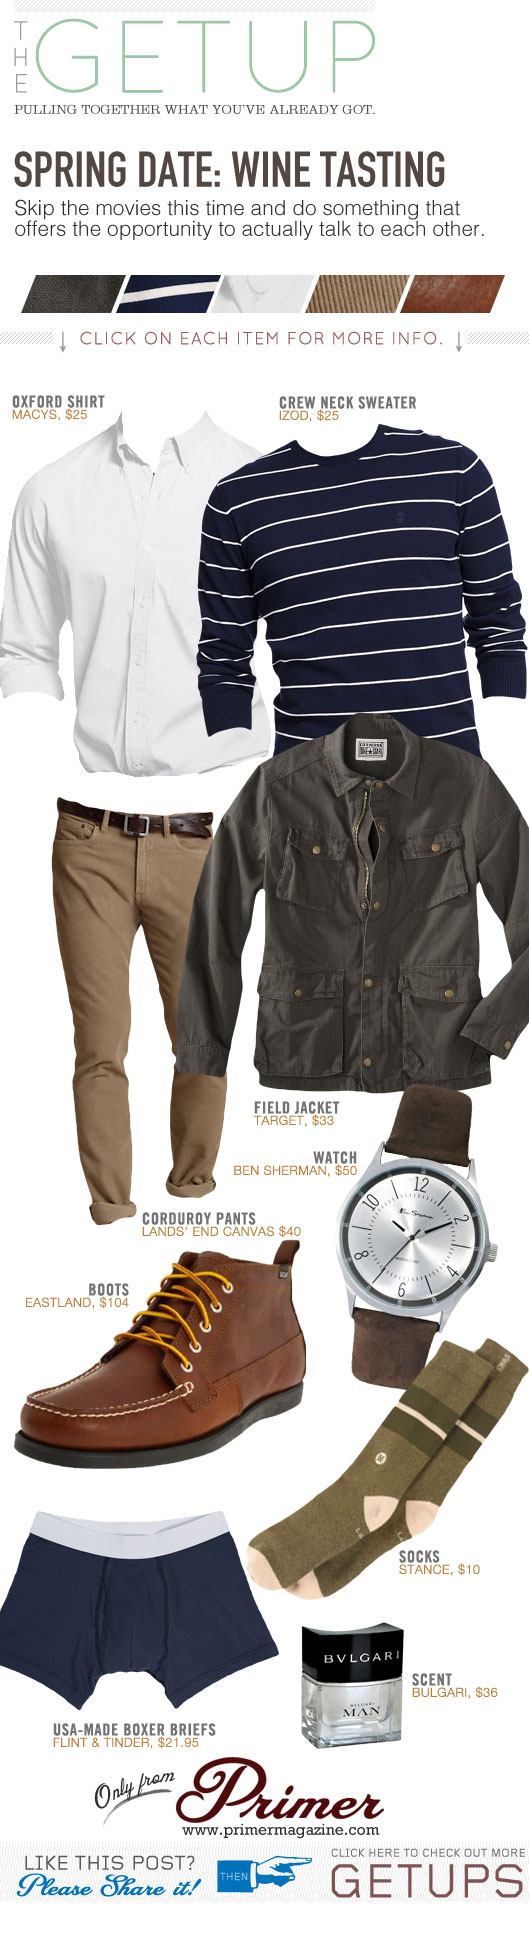 Getup Spring Date Wine Tasting - Field Jacket, striped sweater, white shirt, tan pants